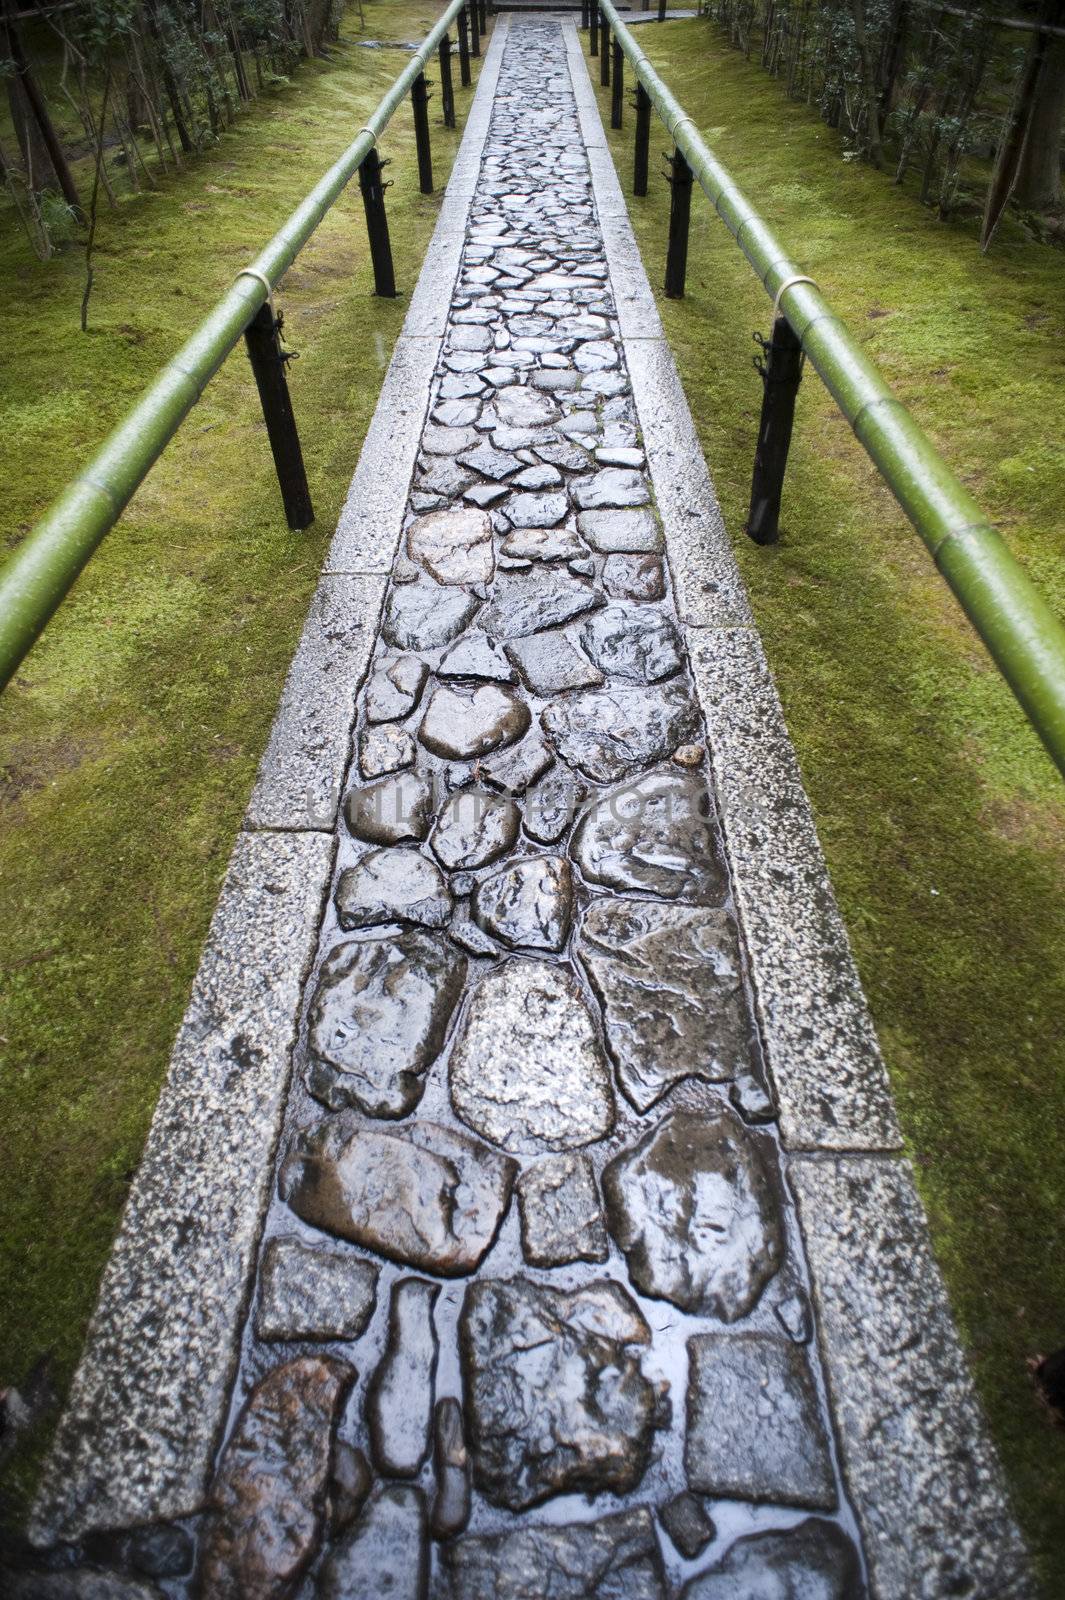 Wet paved footpath between bamboo railings in the formal garden at Koto-in, a sub temple of Daitoku-ji in Nara , Japan